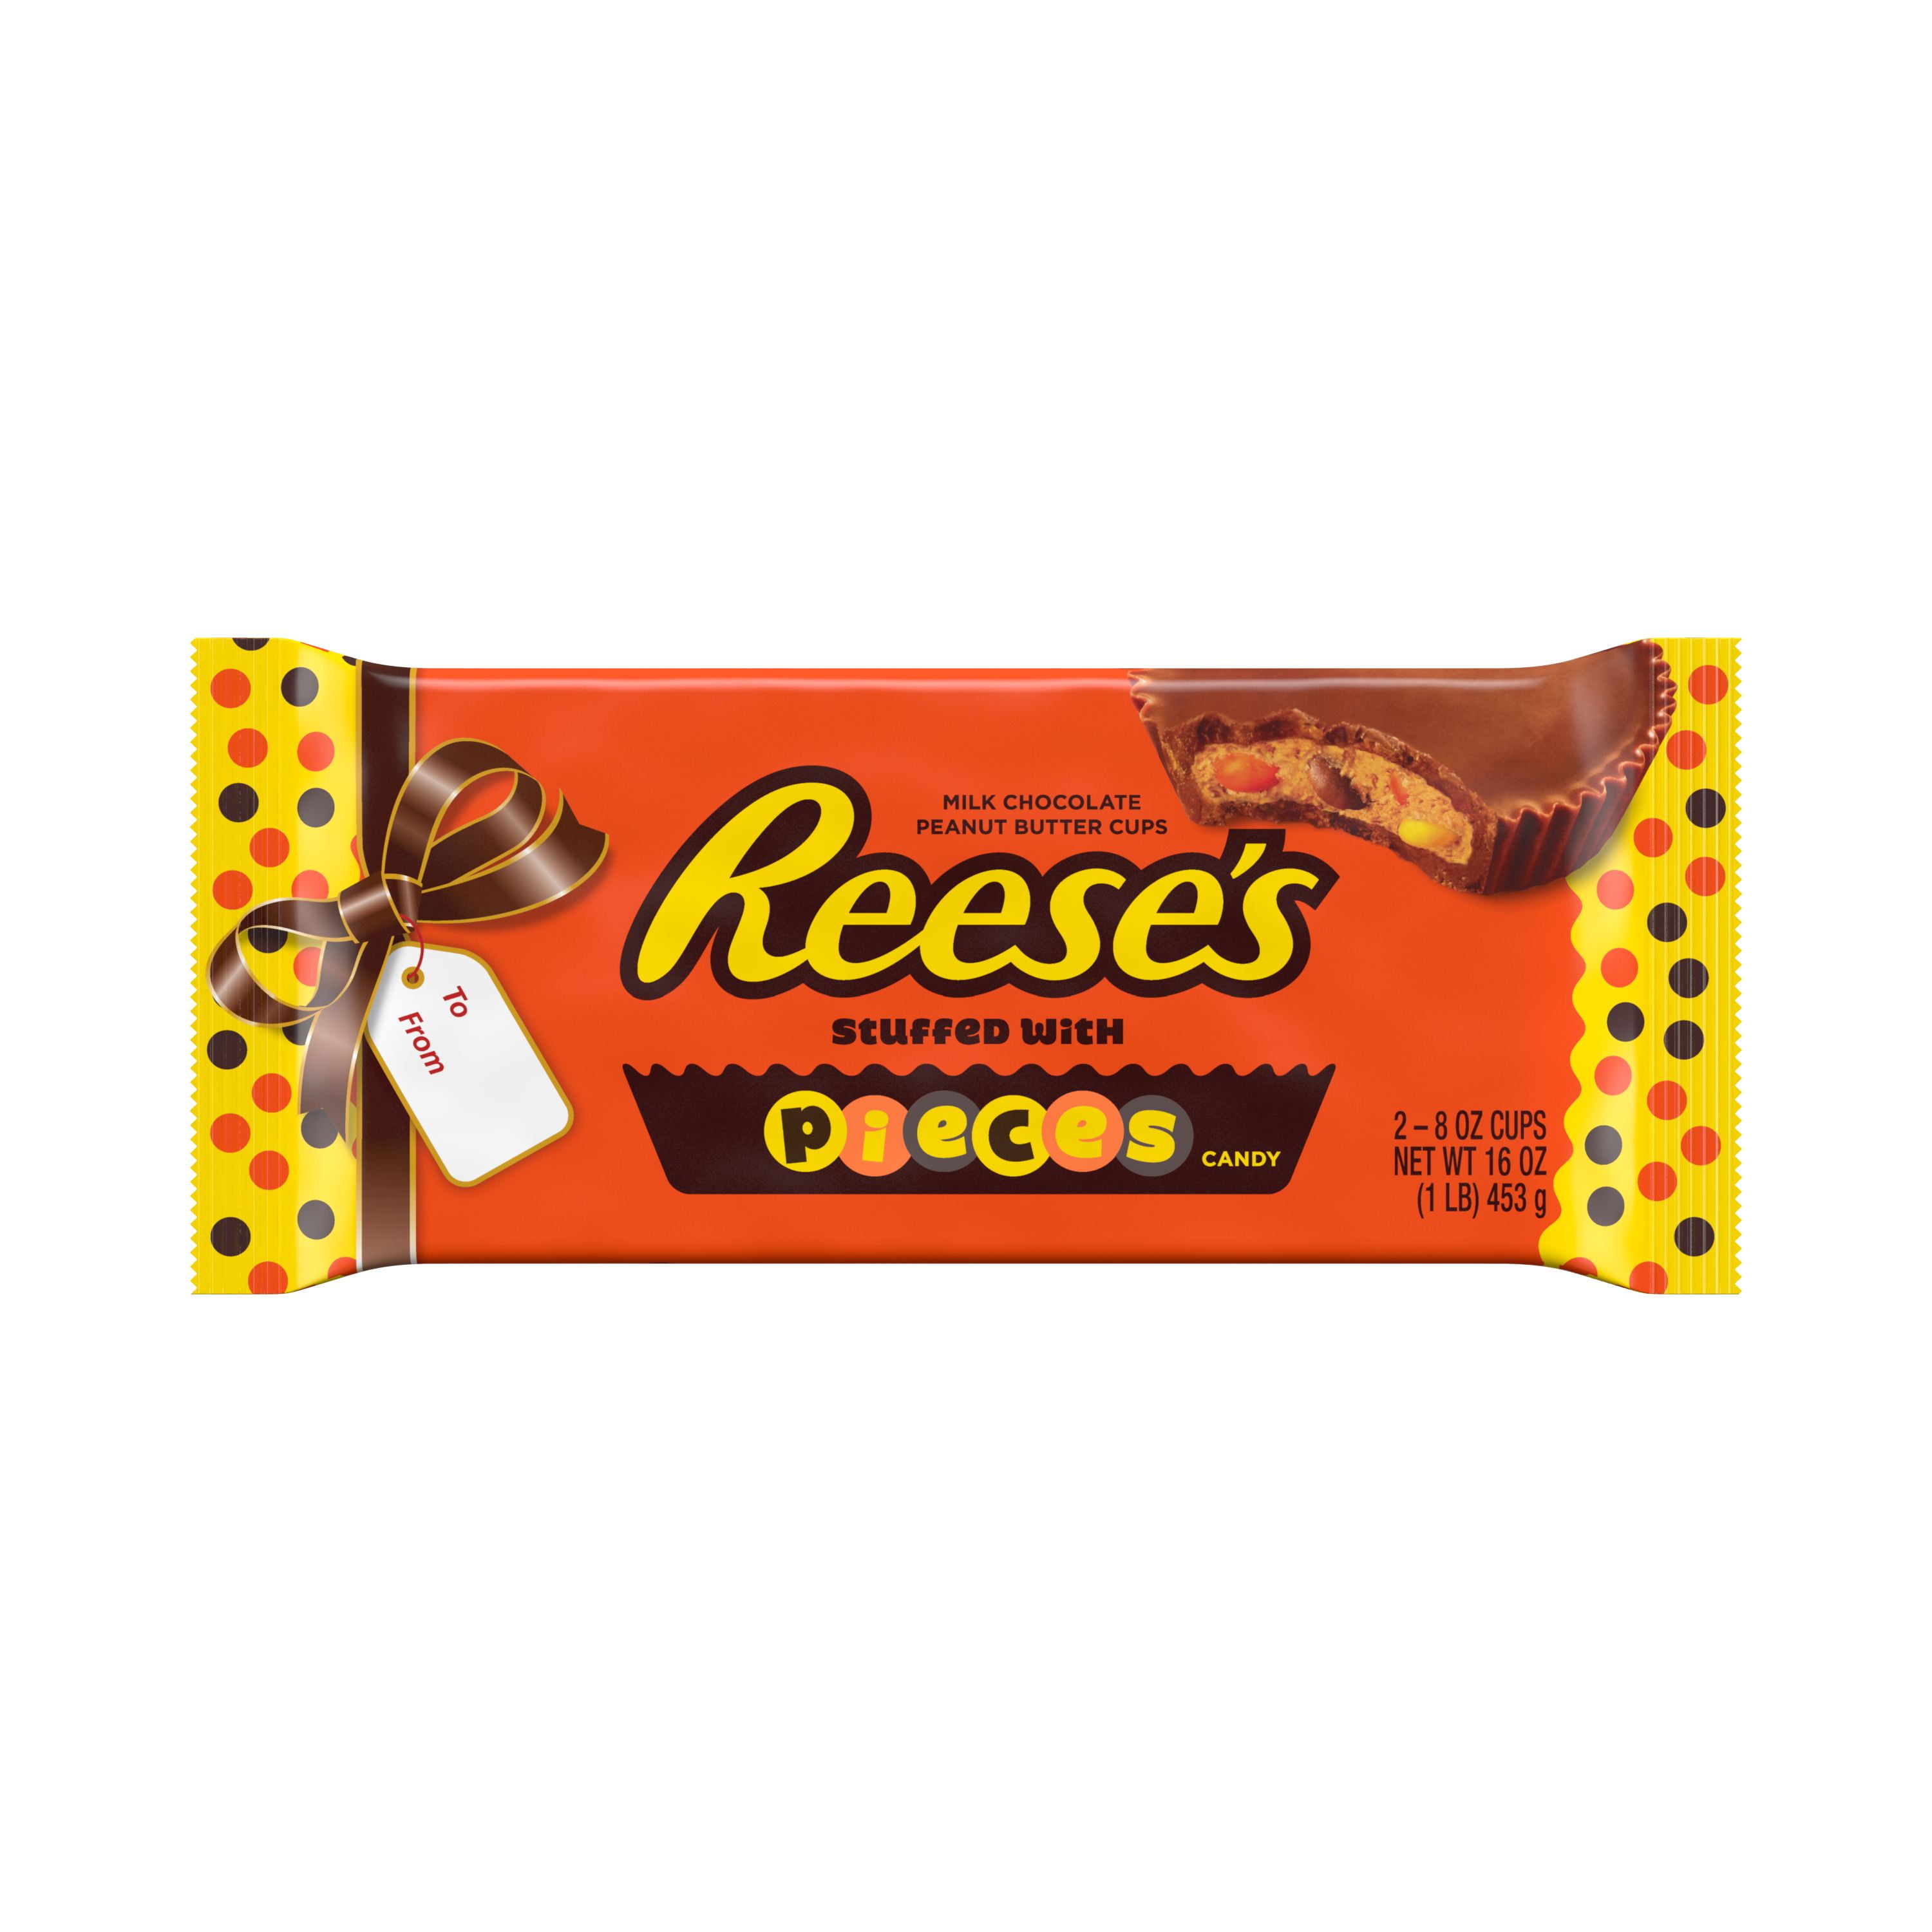 REESE'S Peanut Butter Cup but is in fact stuffed to the brim with deli...